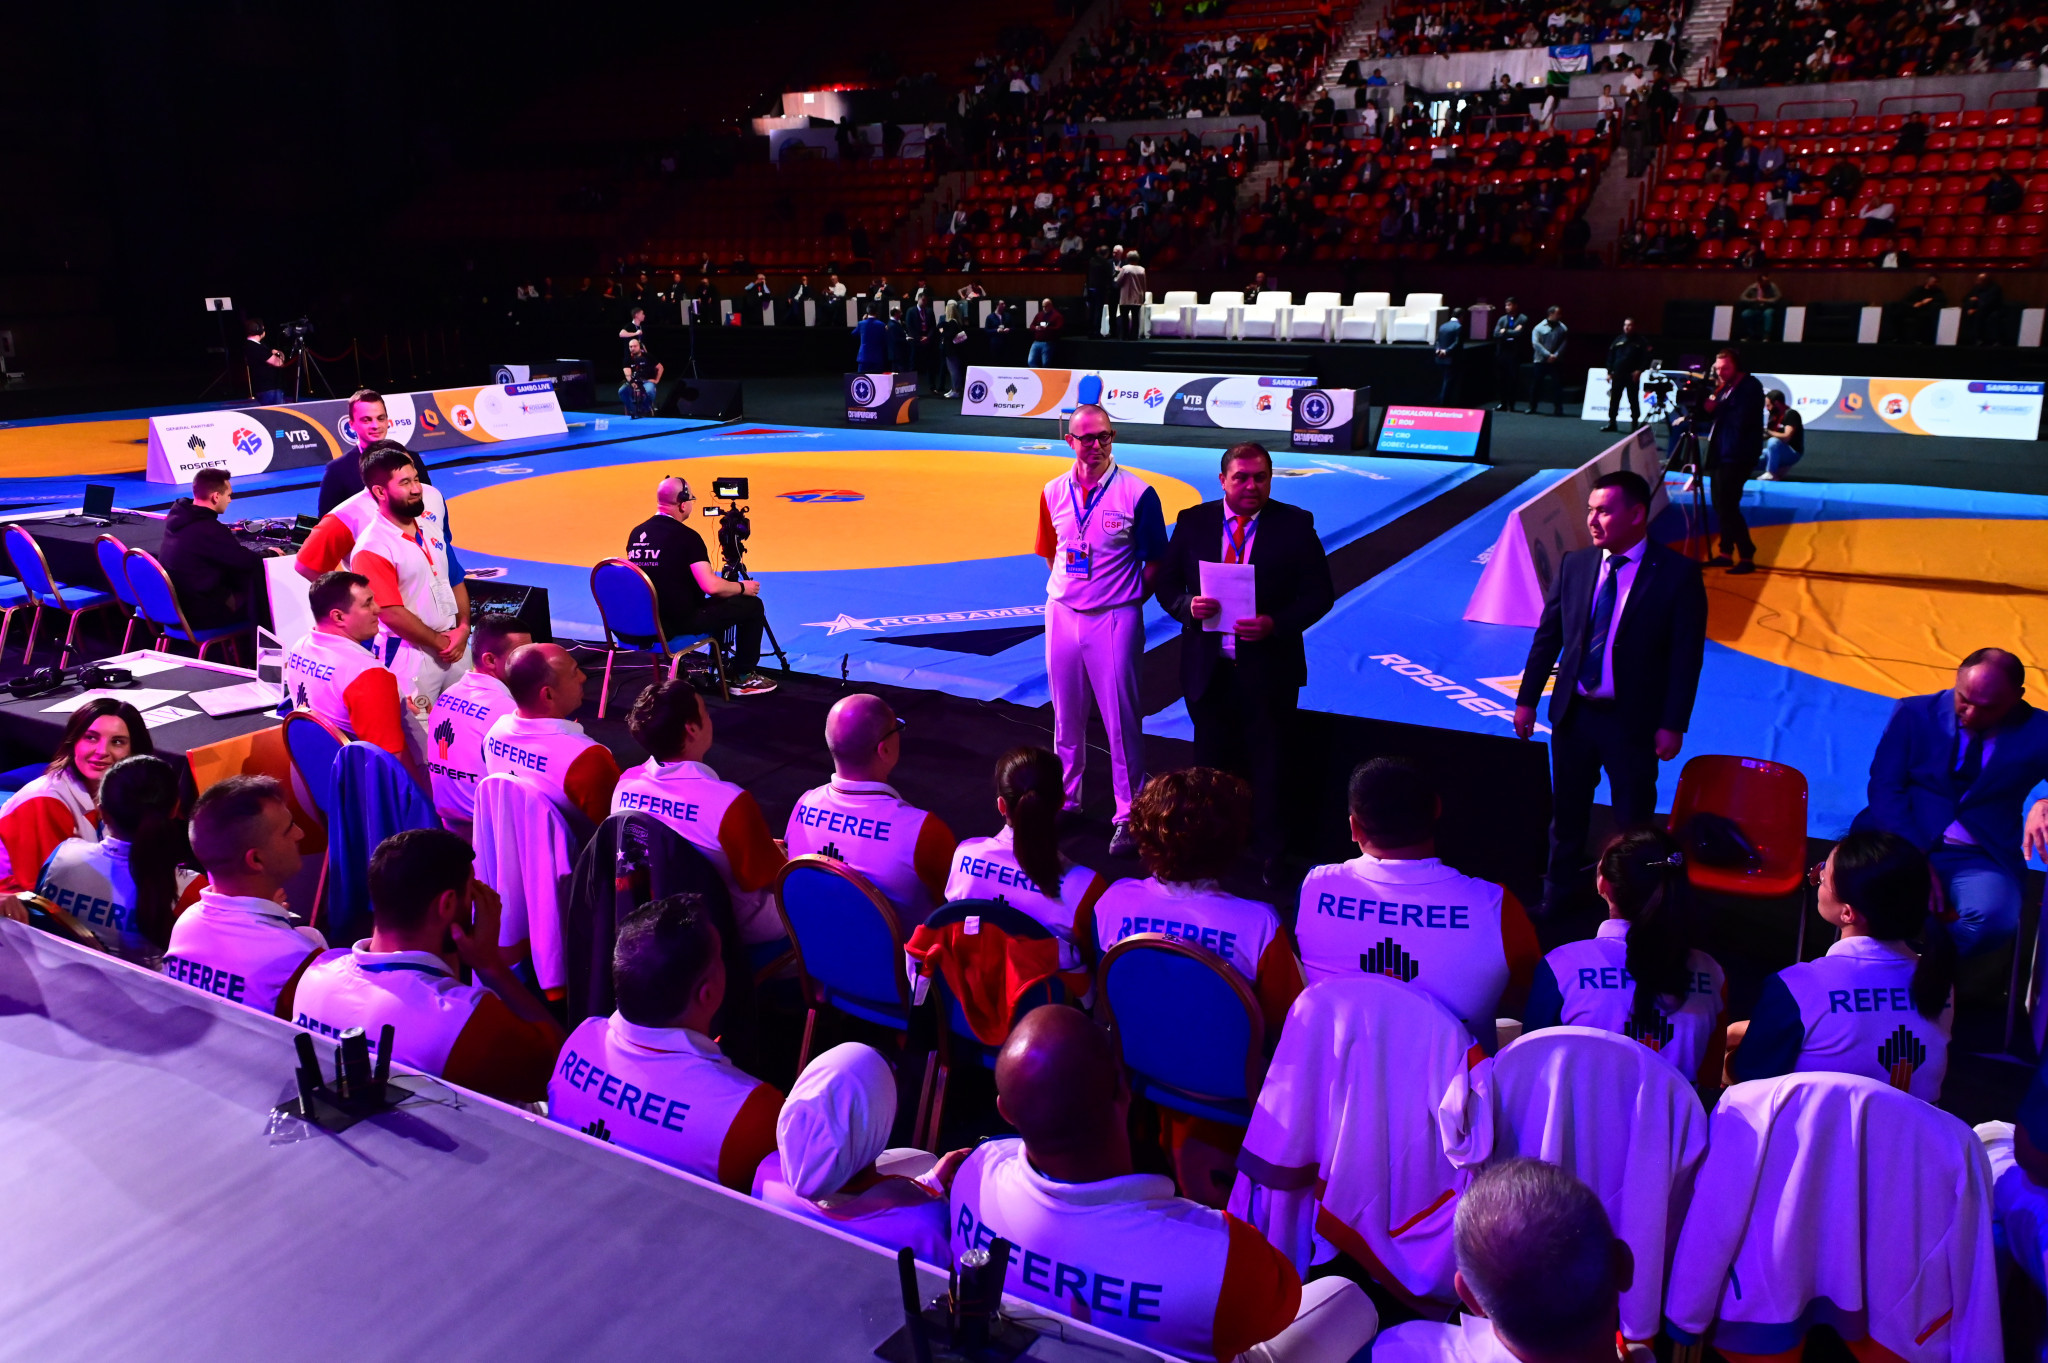 The largest world championship in Sambo's history is over, but even more yet to come for Yerevan